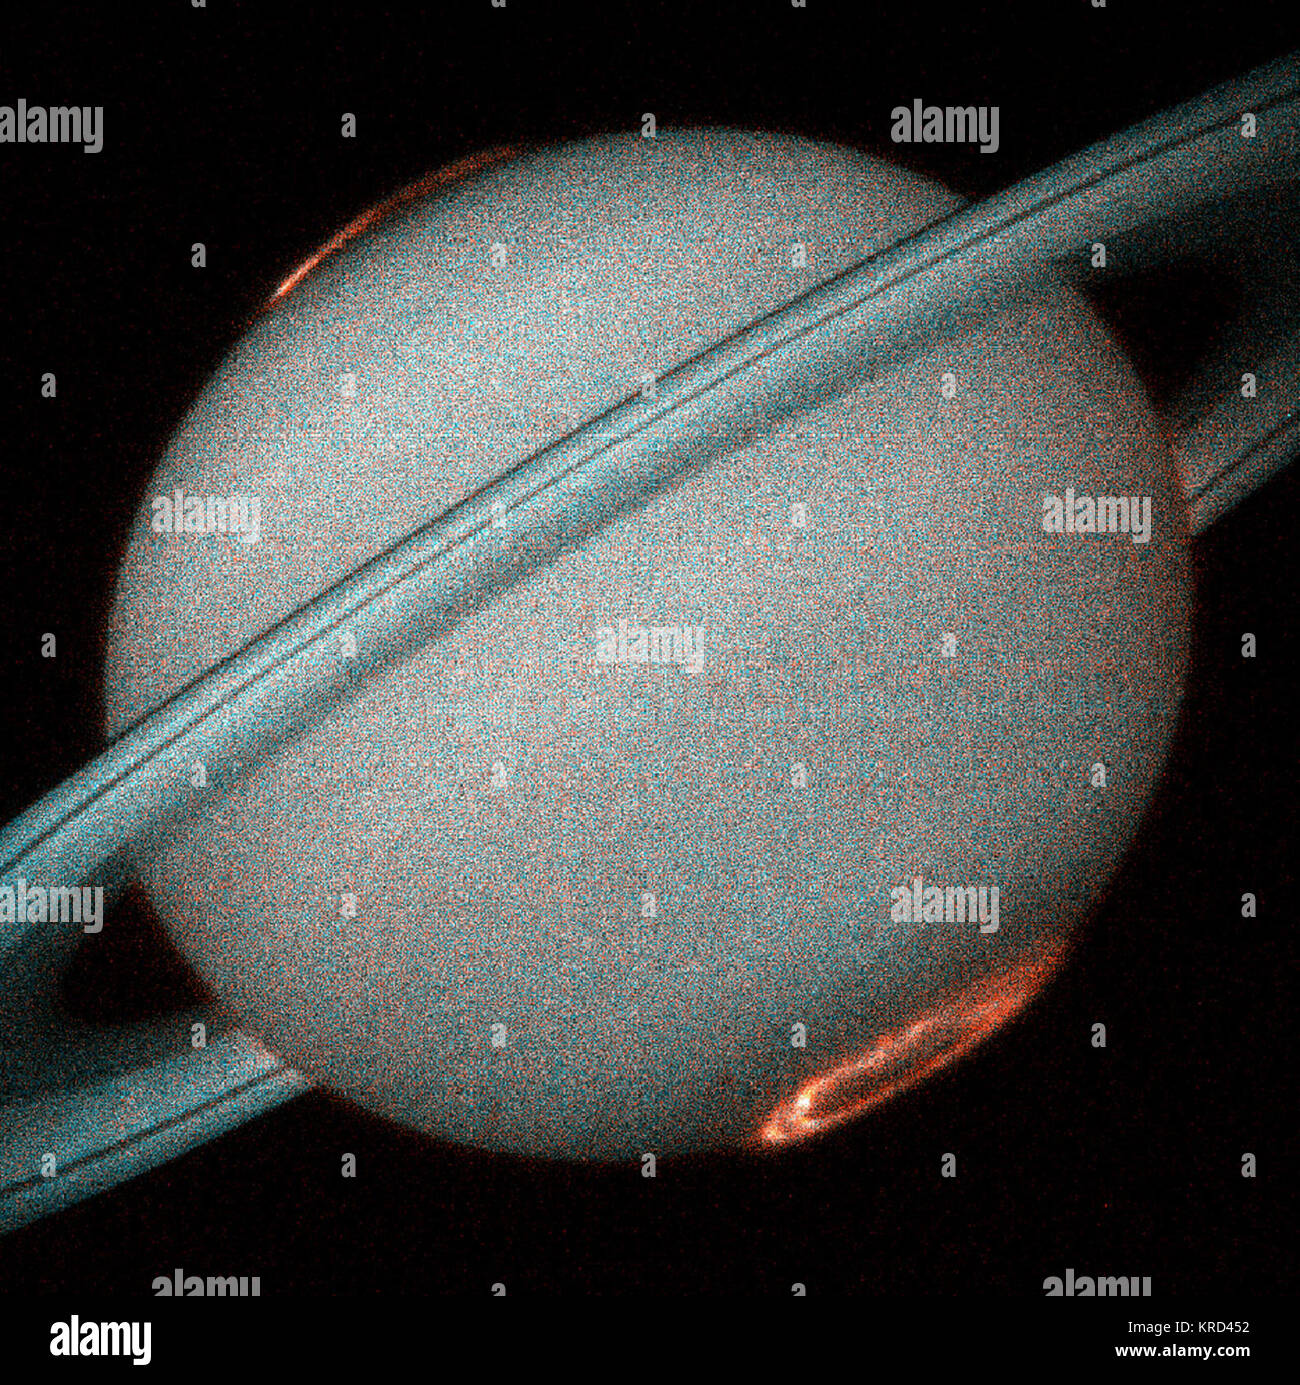 This is the first image of Saturn's ultraviolet aurora taken by the Space Telescope Imaging Spectrograph (STIS) on board the Hubble Space Telescope in October 1997, when Saturn was a distance of 810 million miles (1.3 billion kilometers) from Earth. The new instrument, used as a camera, provides more than ten times the sensitivity of previous Hubble instruments in the ultraviolet. STIS images reveal exquisite detail never before seen in the spectacular auroral curtains of light that encircle Saturn s north and south poles and rise more than a thousand miles above the cloud tops. Aurora Saturn Stock Photo